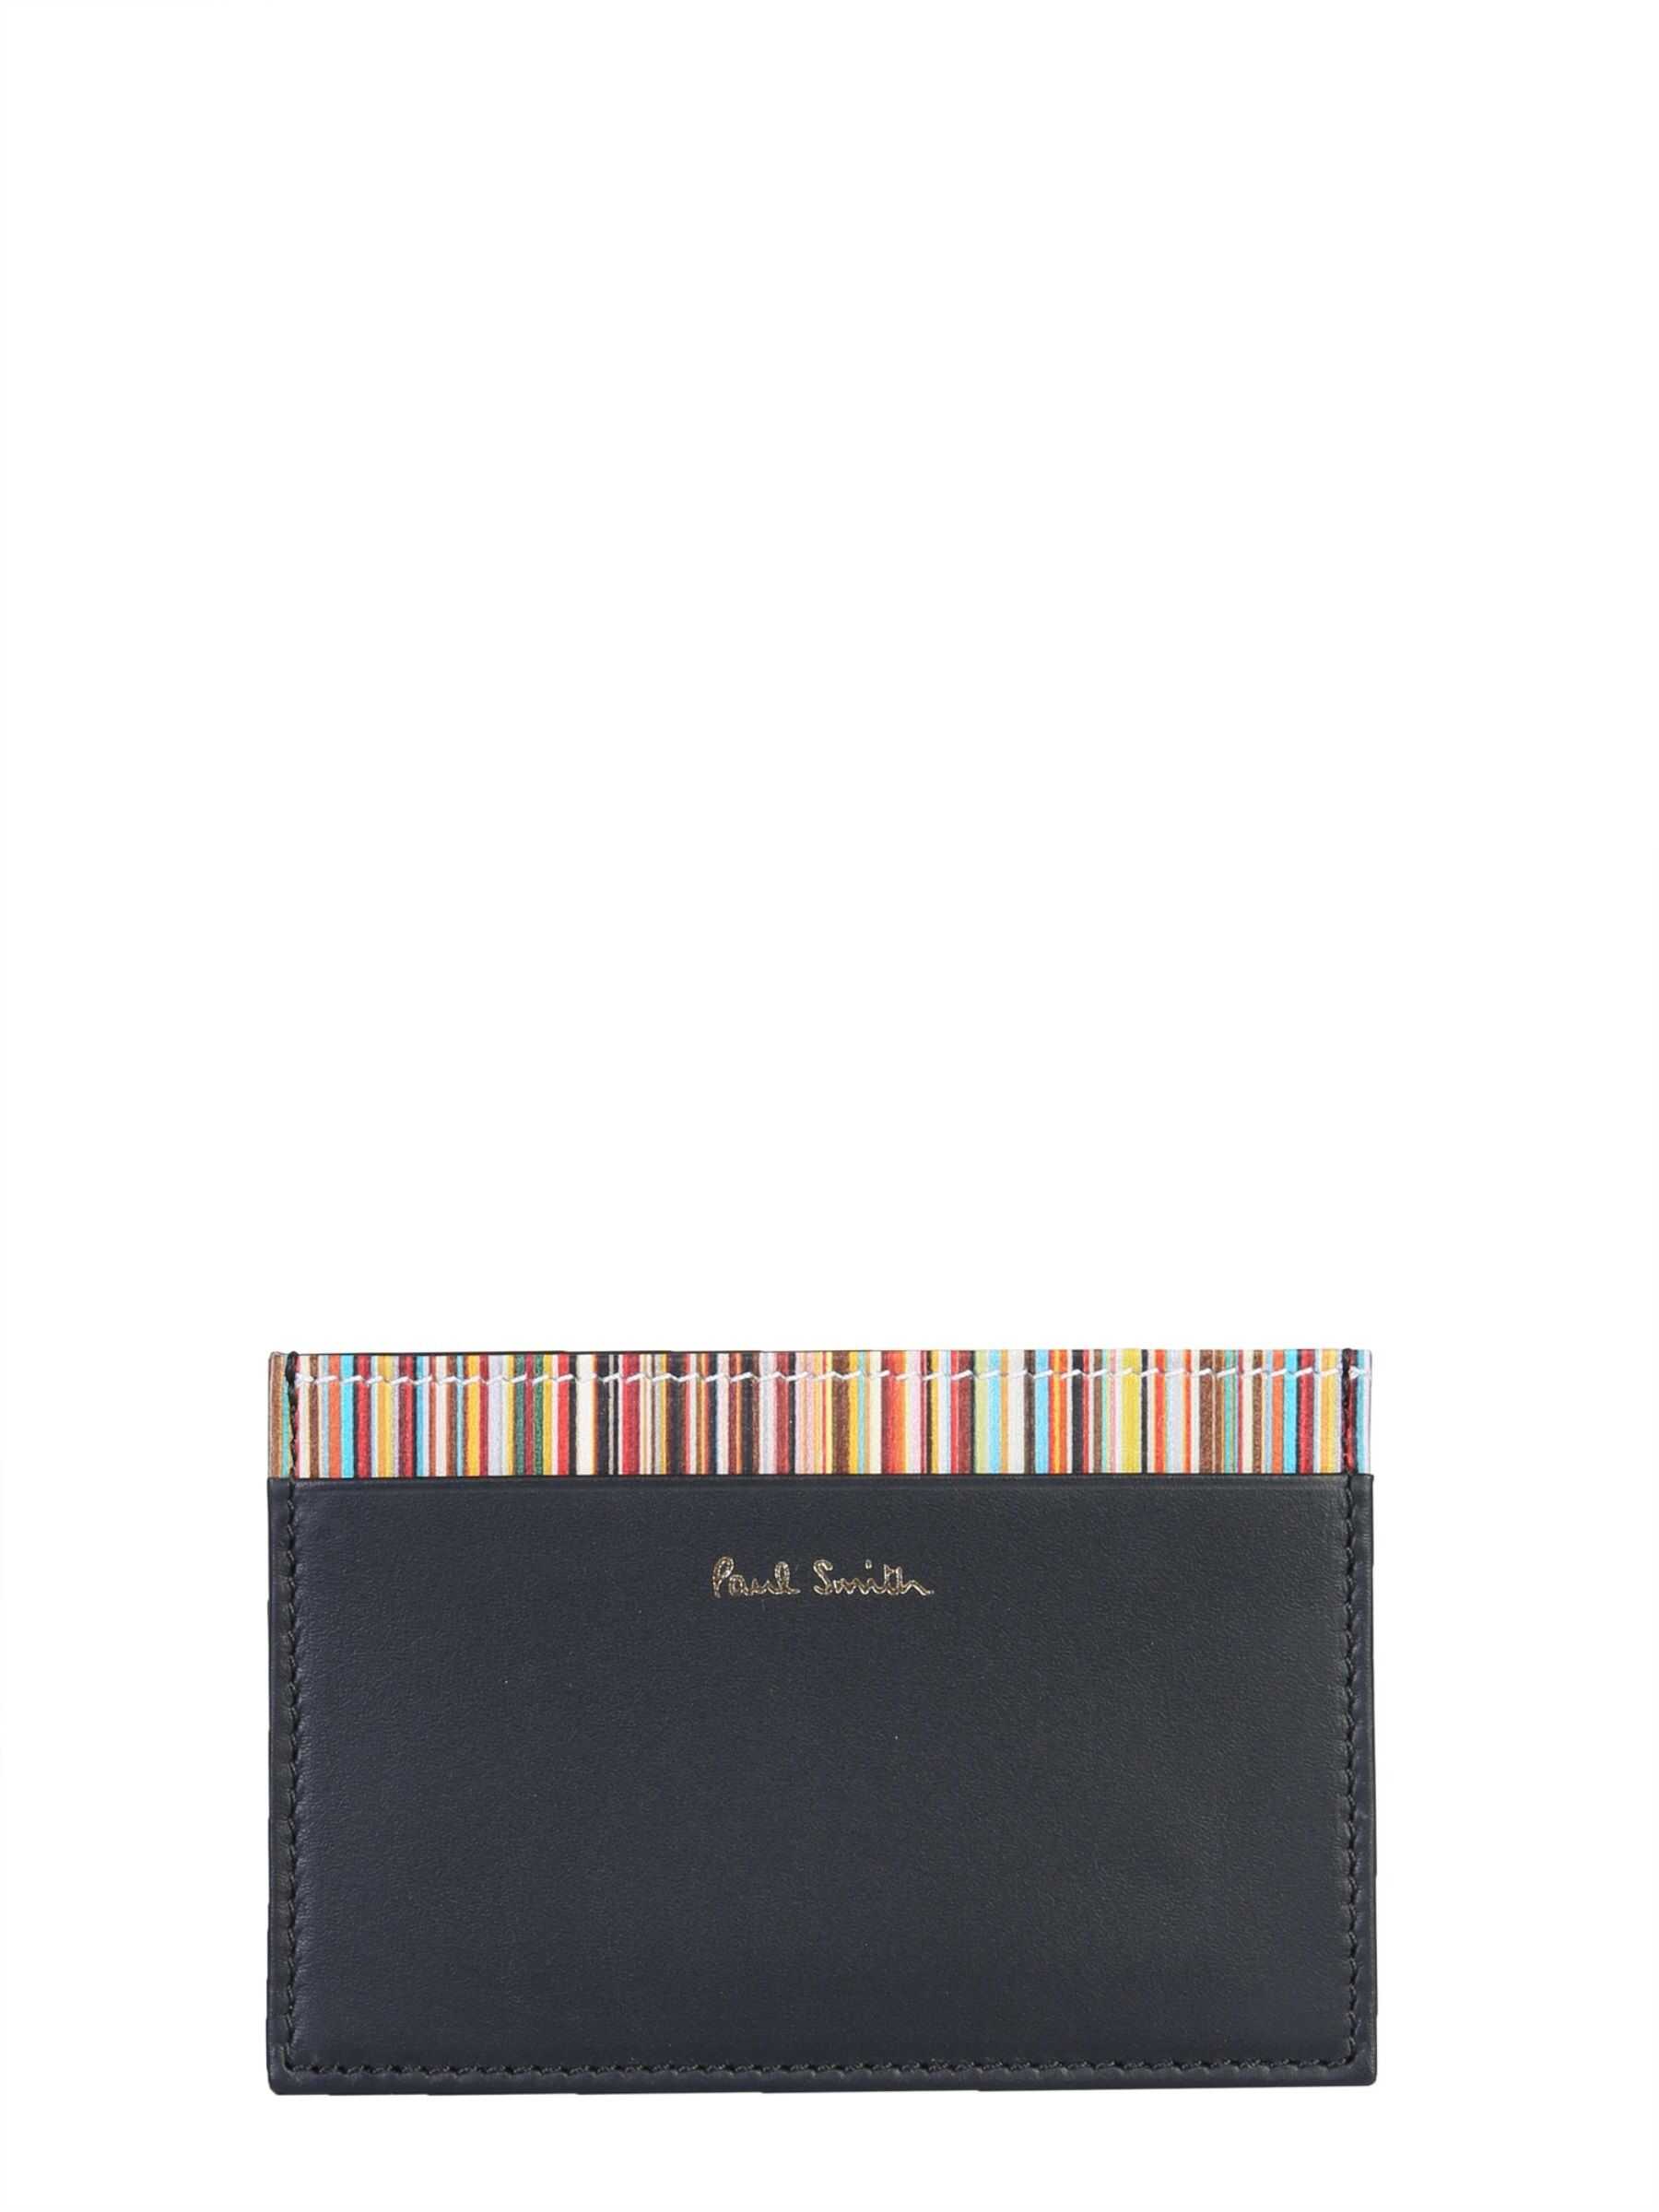 Paul Smith Card Holder With Stripe Signatures BLACK